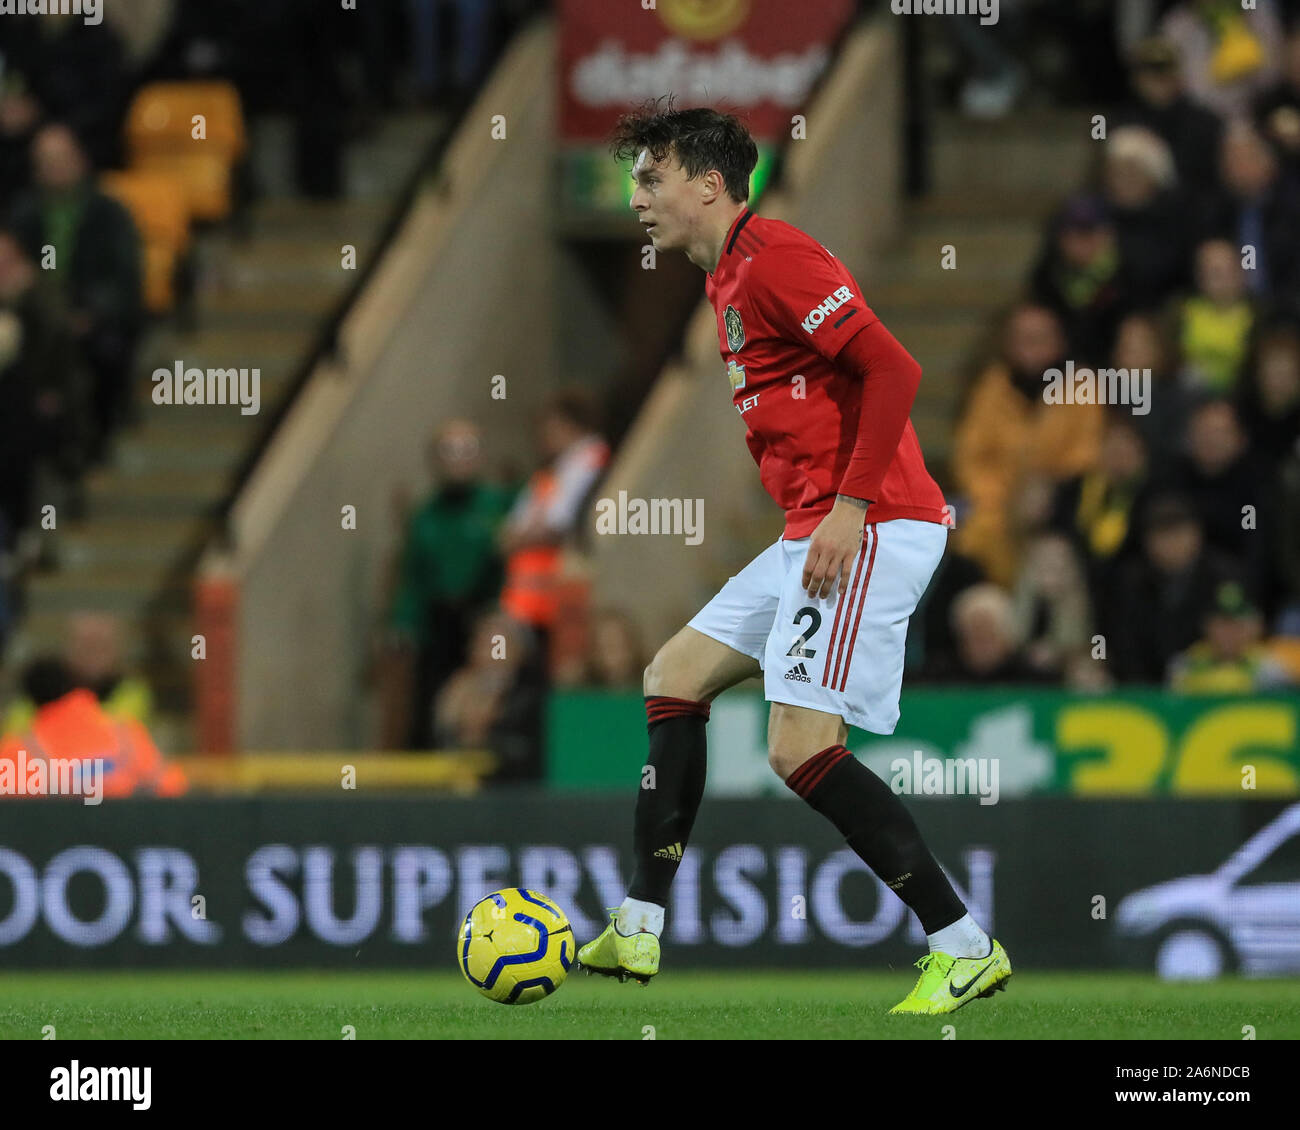 27th October 2019, Carrow Road, Norwich, England; Premier League, Norwich City v Manchester United : Victor Lindelof (2) of Manchester United during the game Credit: Mark Cosgrove/News Images Stock Photo